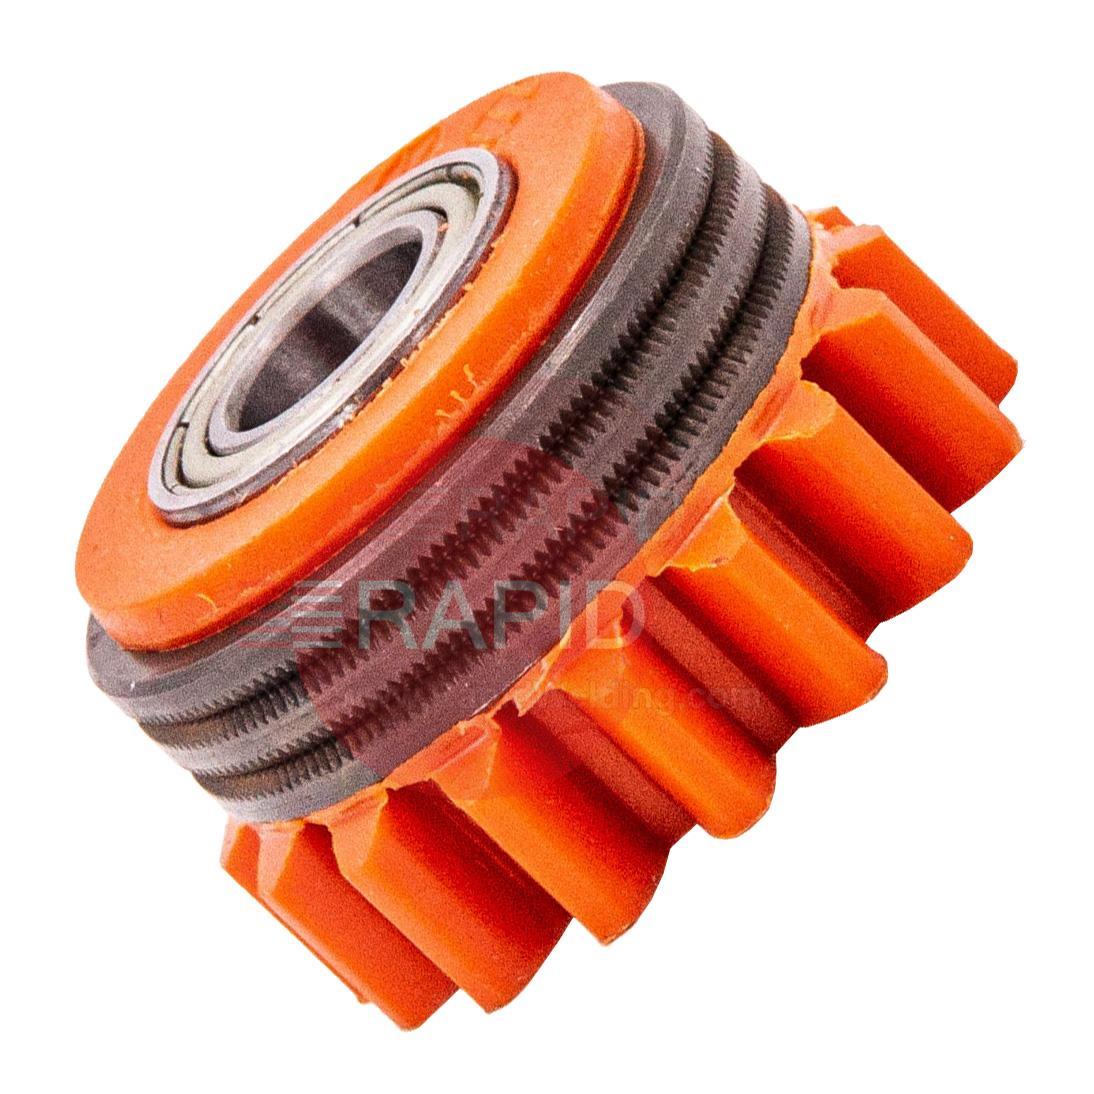 3137380  Kemppi Bearing Feed Roll. Orange,1.2mm Knurled Groove For Cored Wire